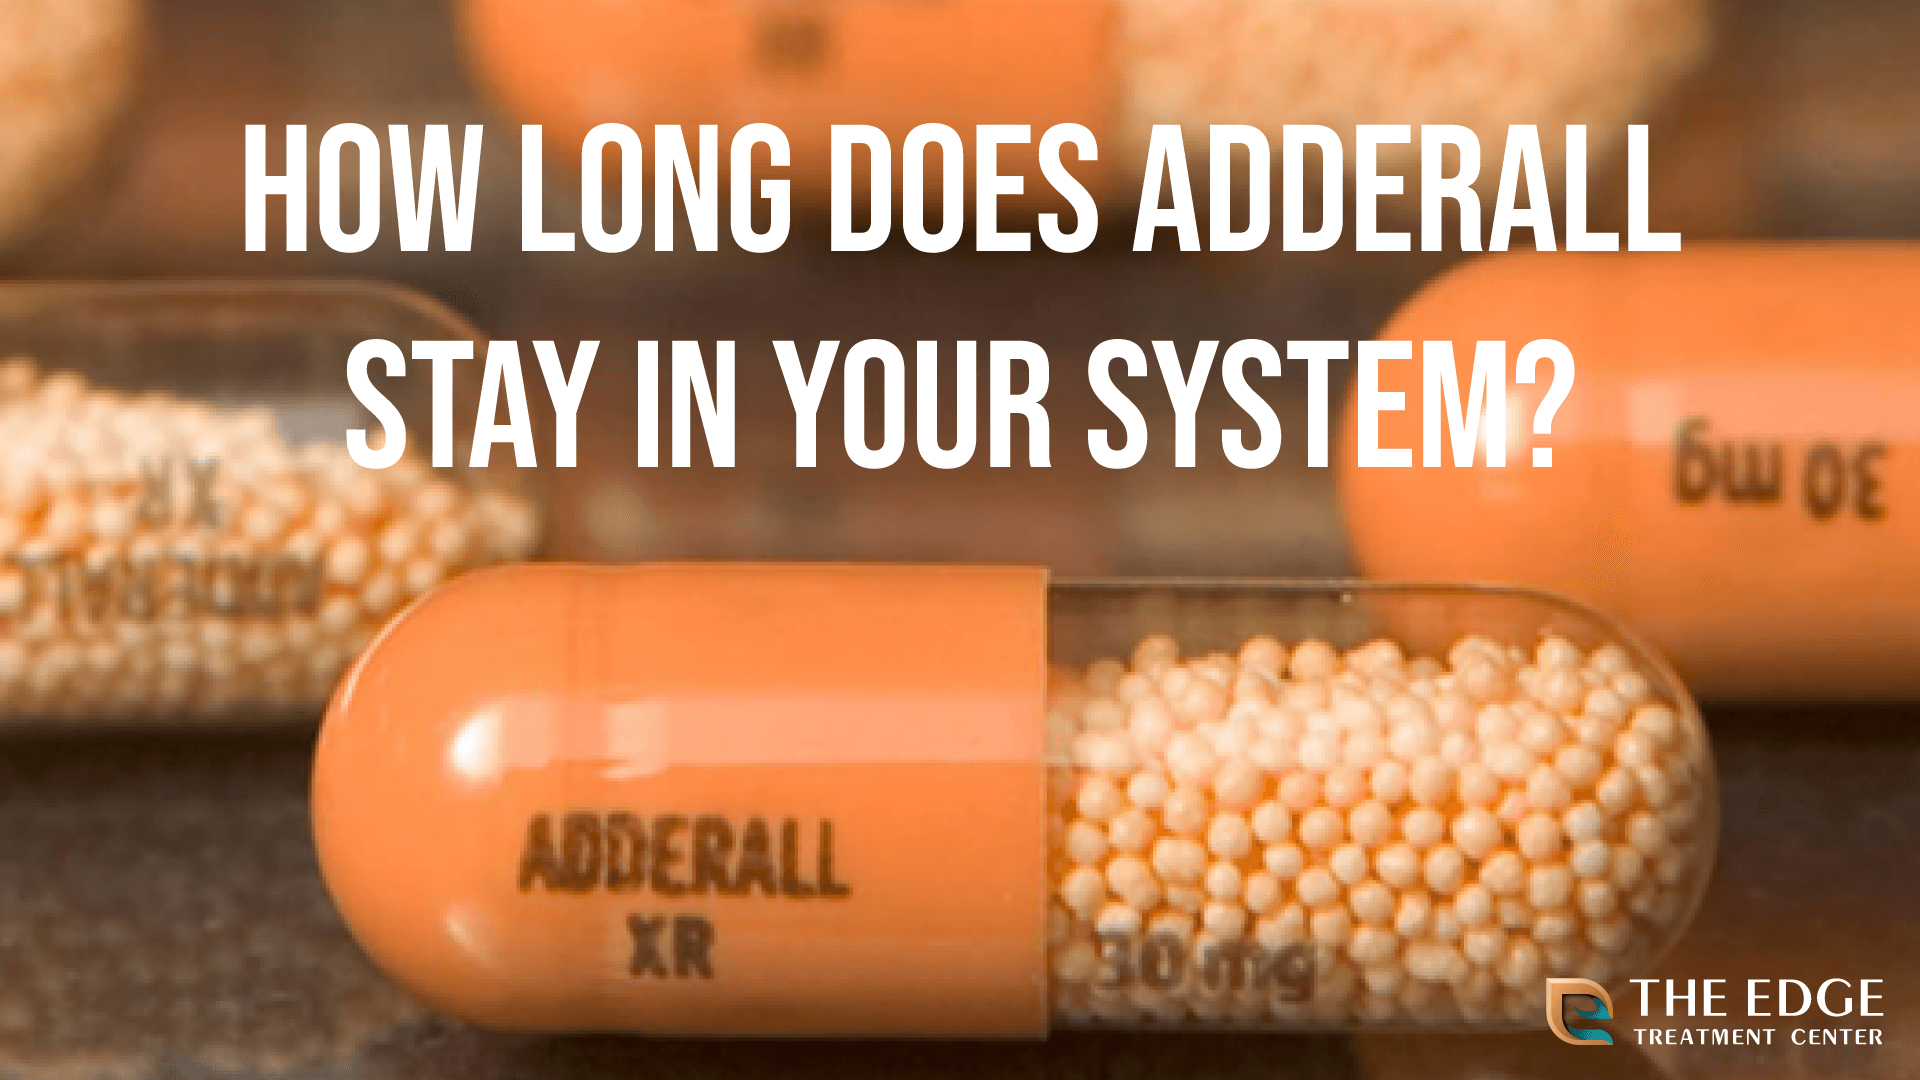 Modafinil Vs Adderall: Which Is Better For Productivity?